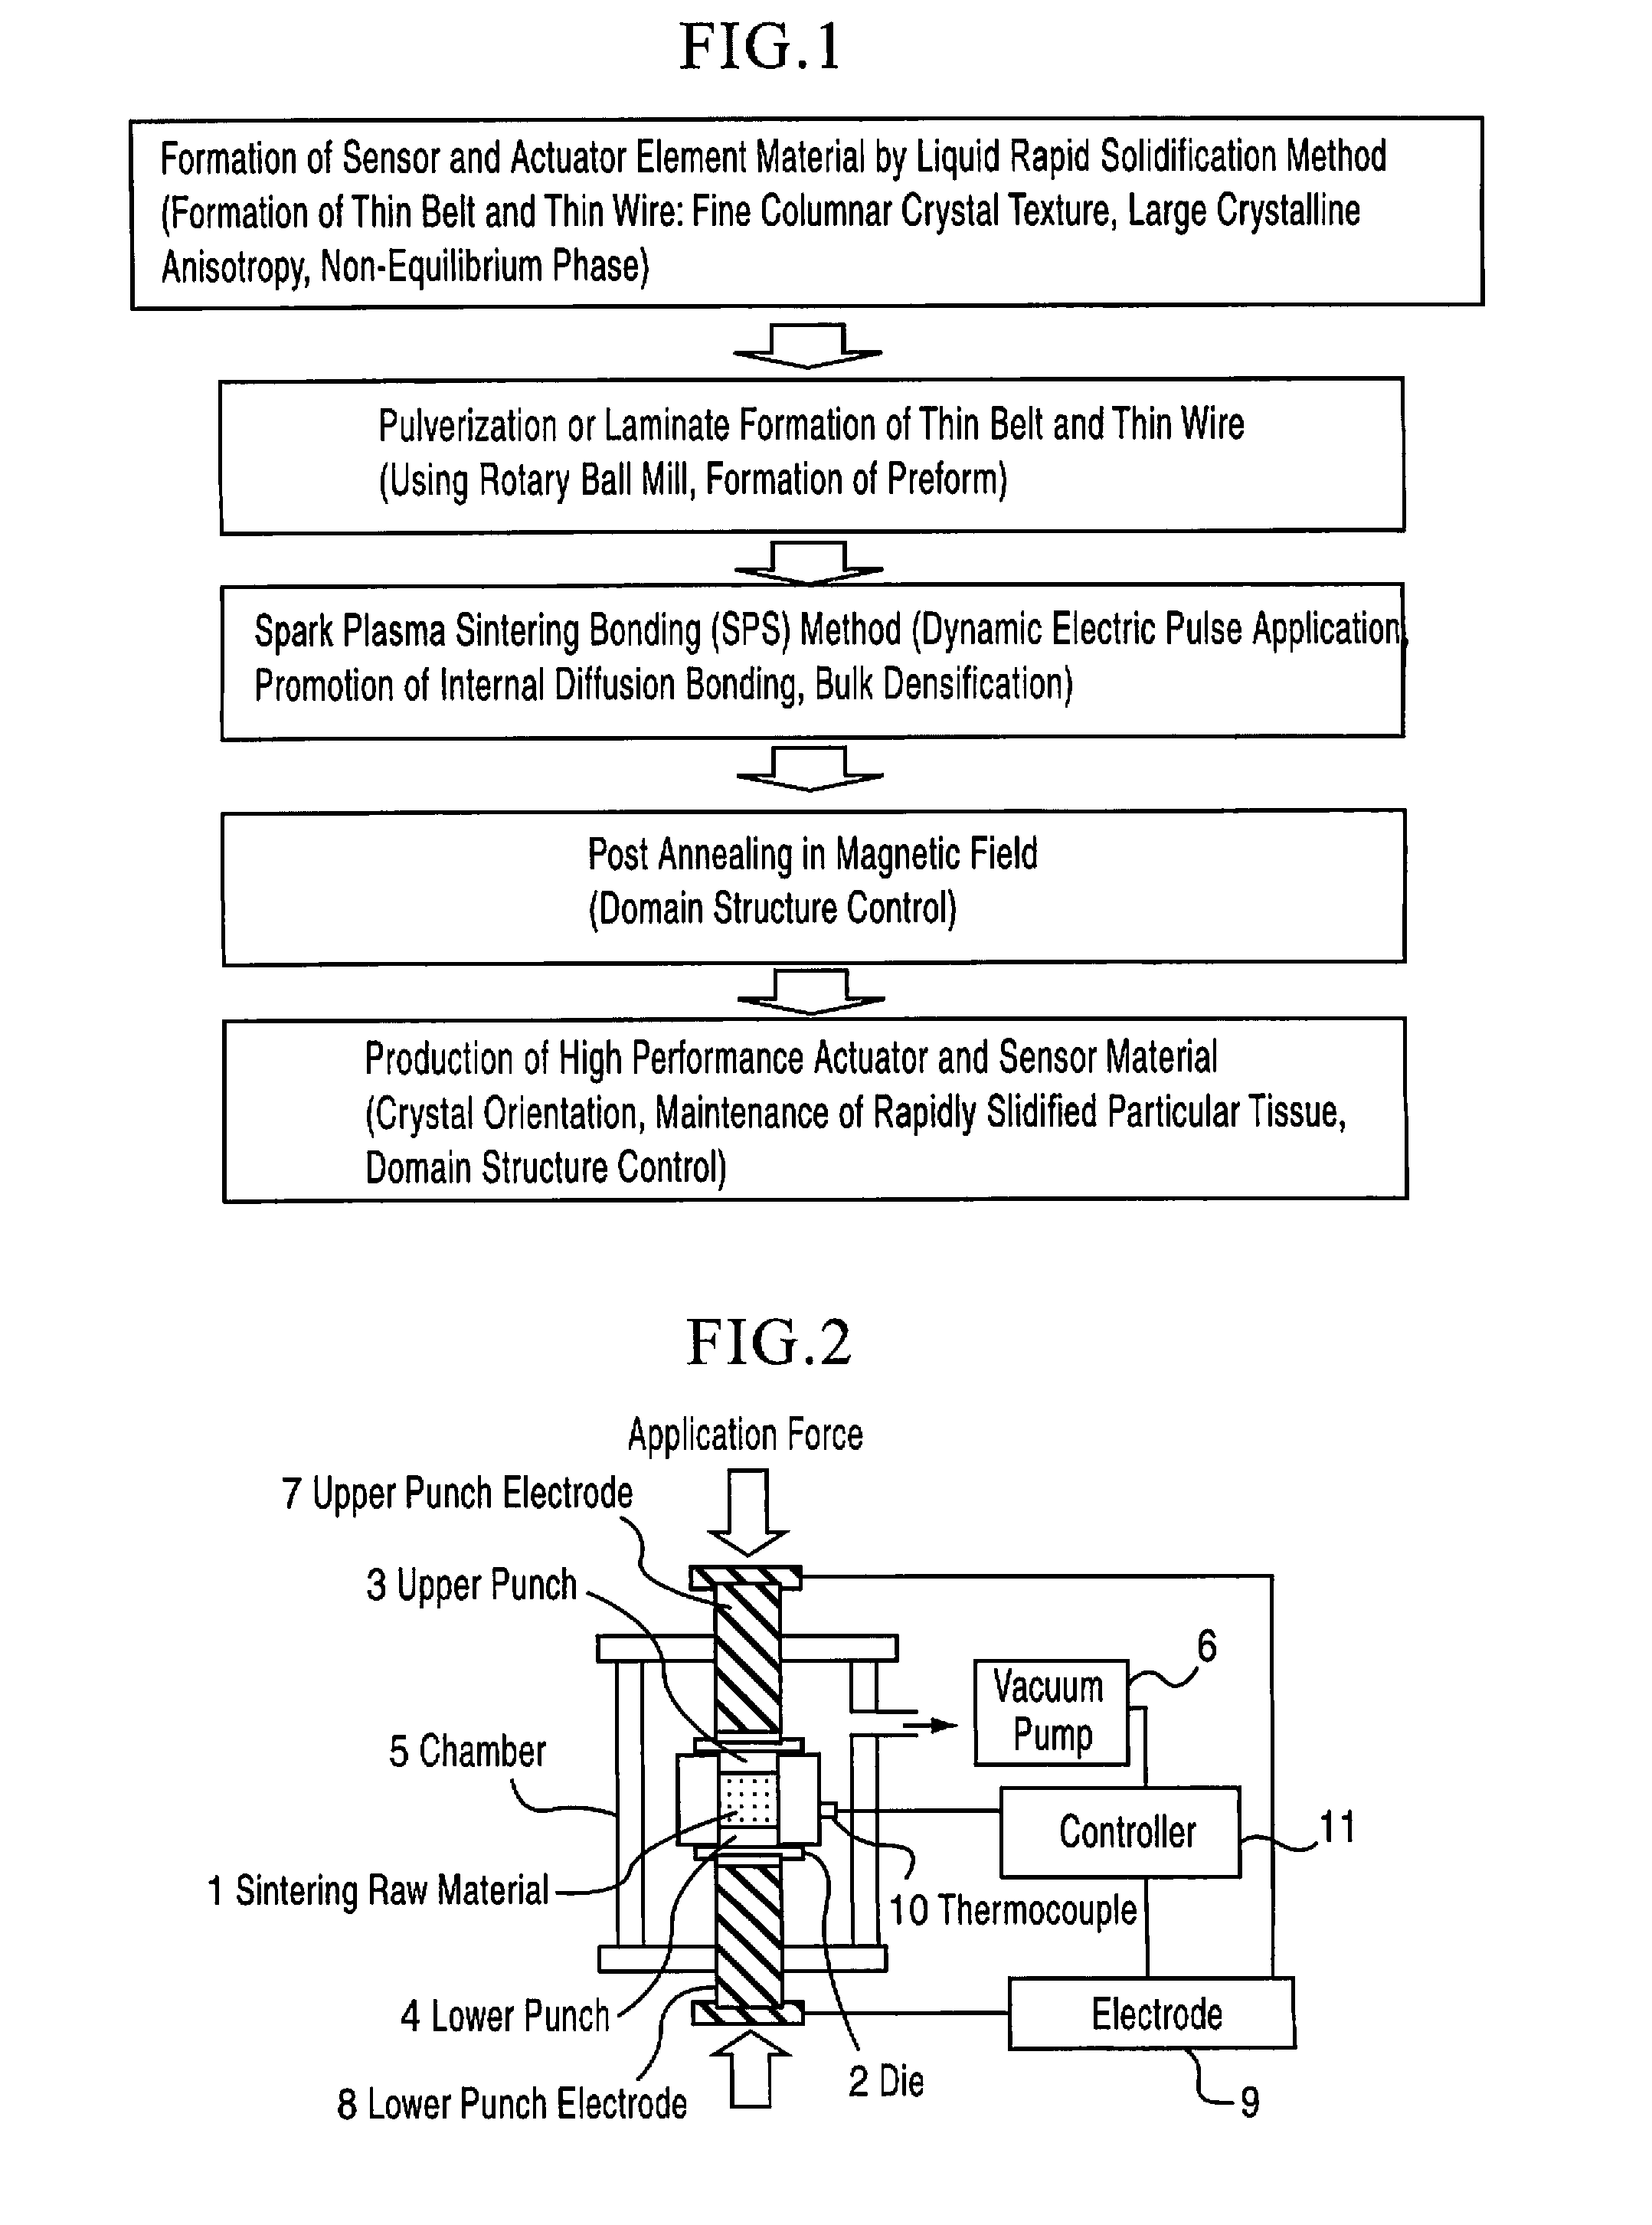 Bulk solidified quenched material and process for producing the same